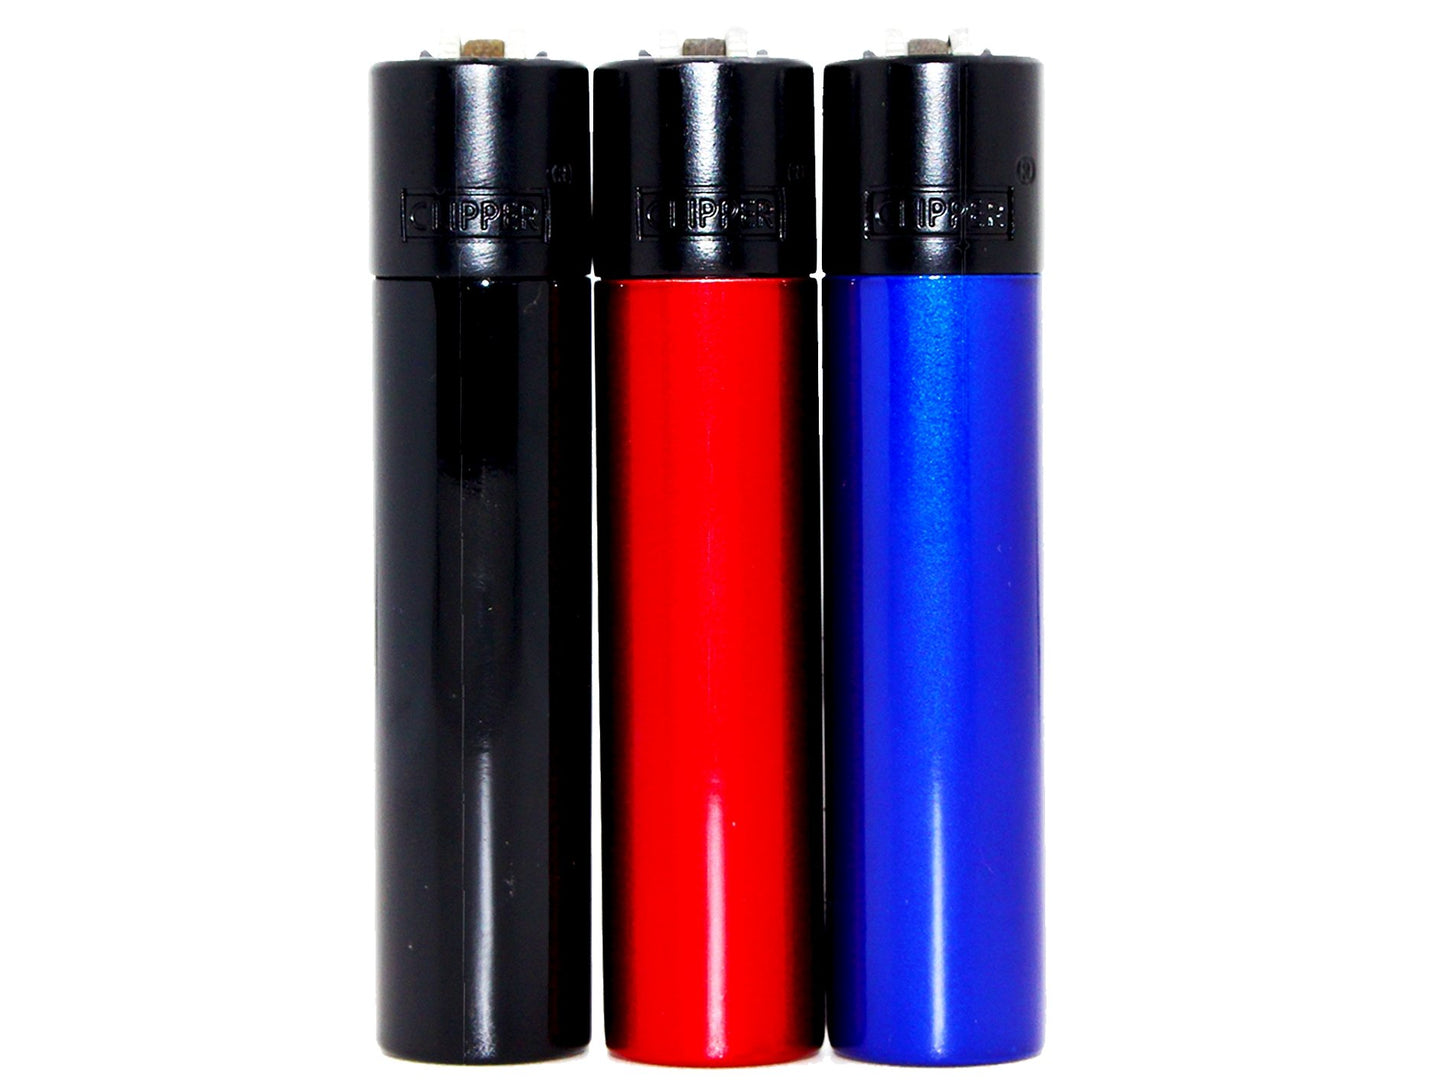 Metal Night CLIPPER Lighter With Case - VIR Wholesale